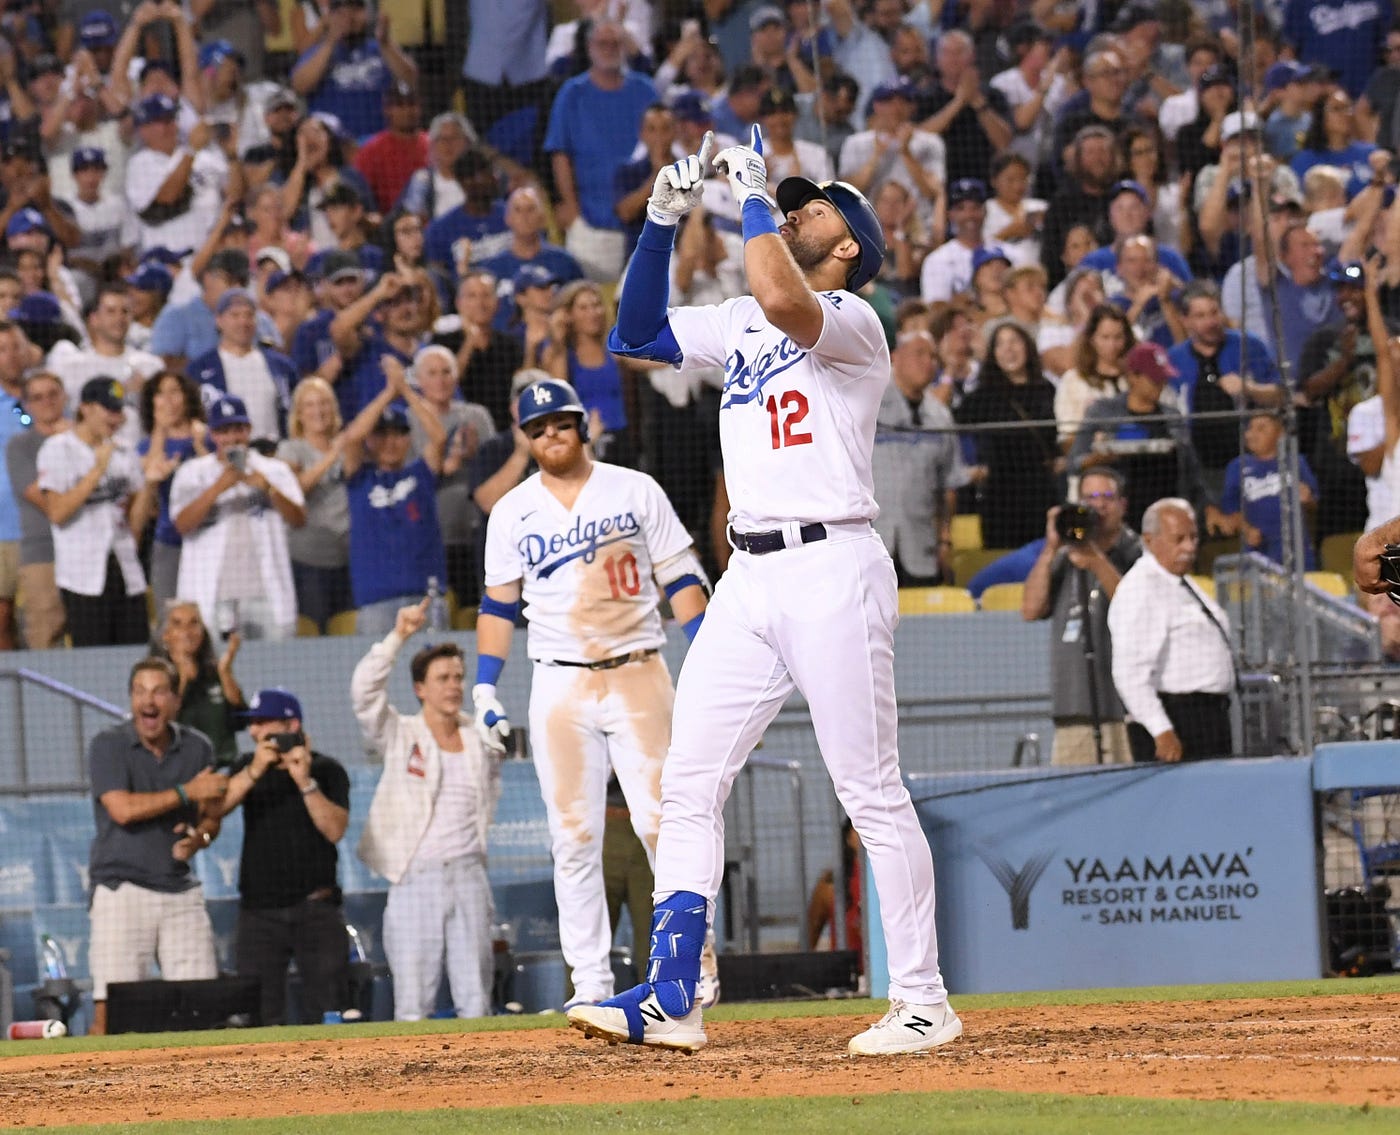 Dodgers bulldoze Twins to complete a perfect homestand, by Cary Osborne